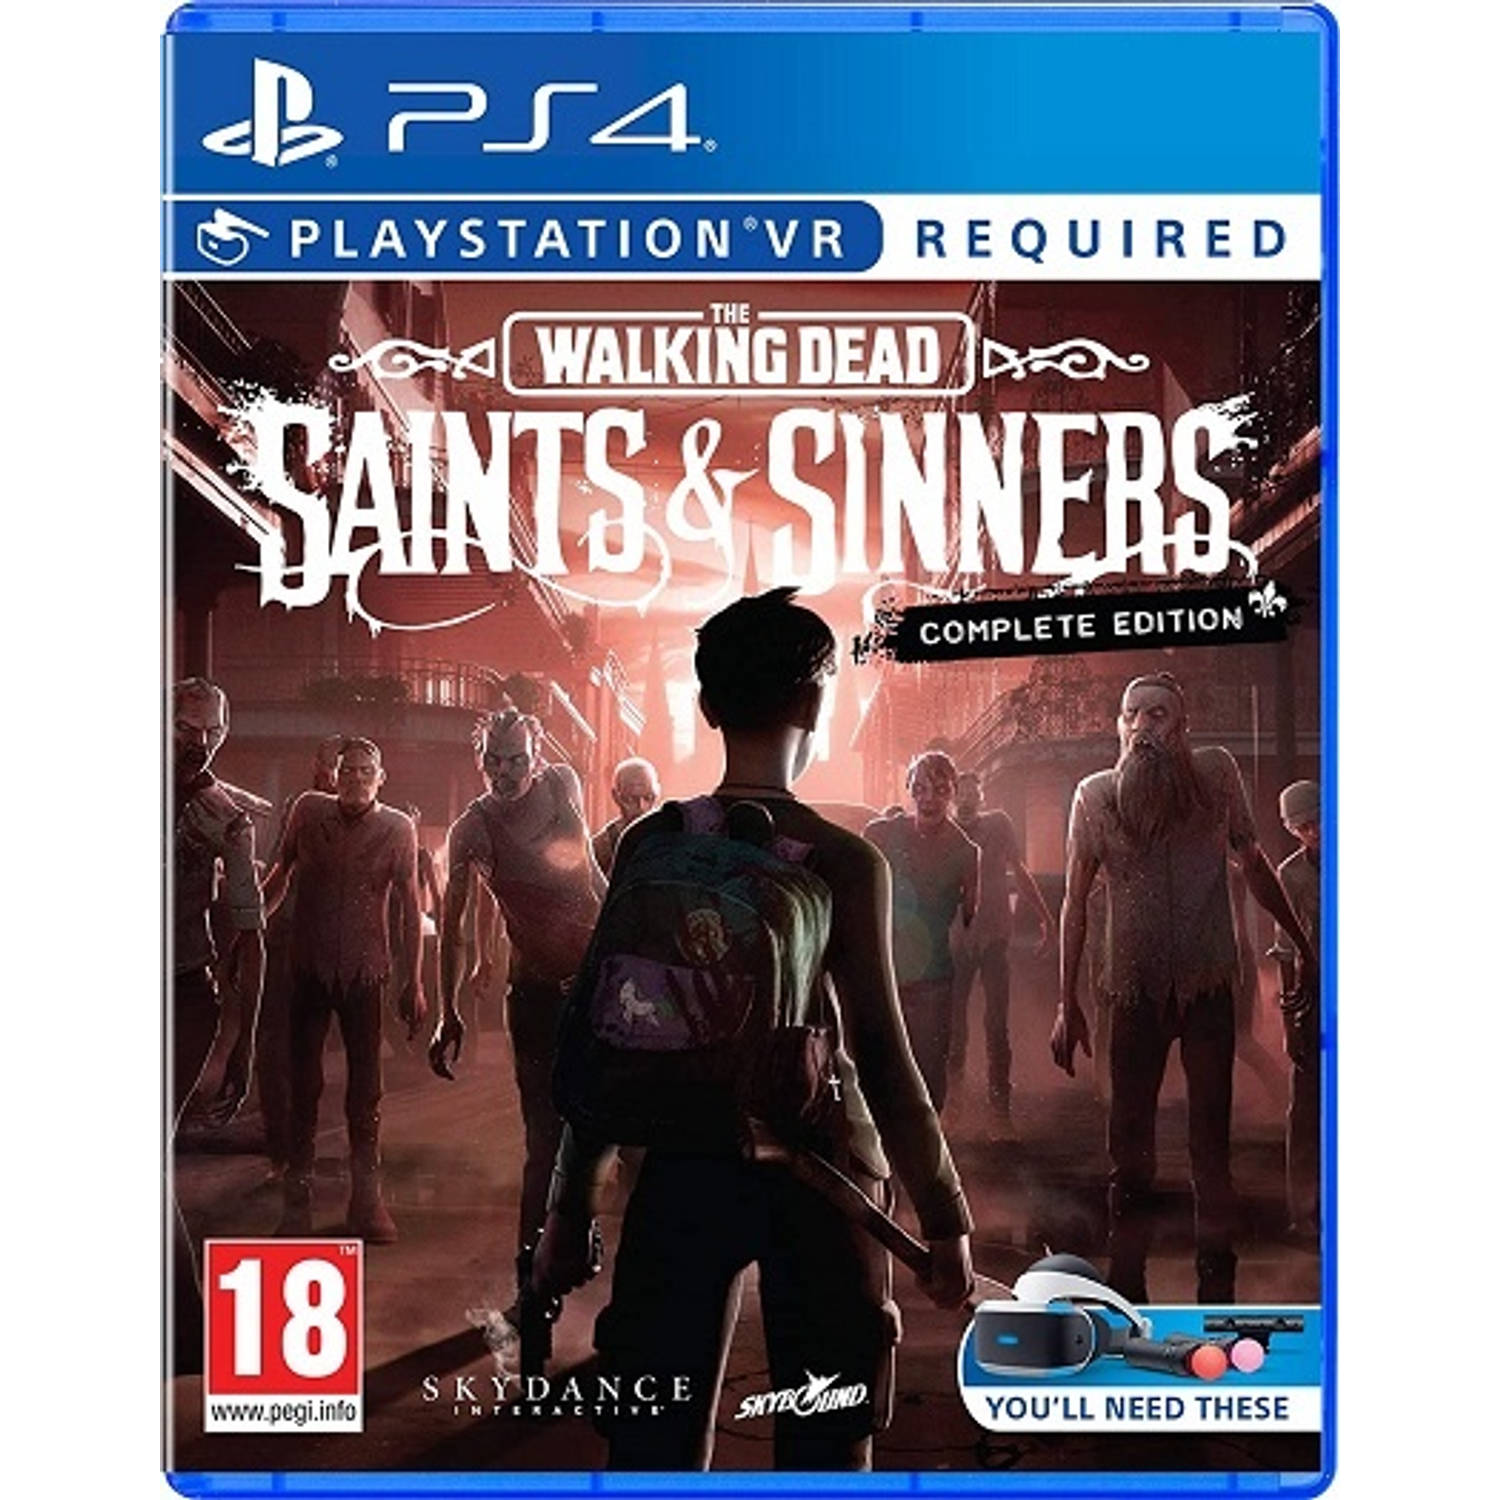 The Walking Dead: Saints & Sinners - The Complete Edition (PSVR) - PS4